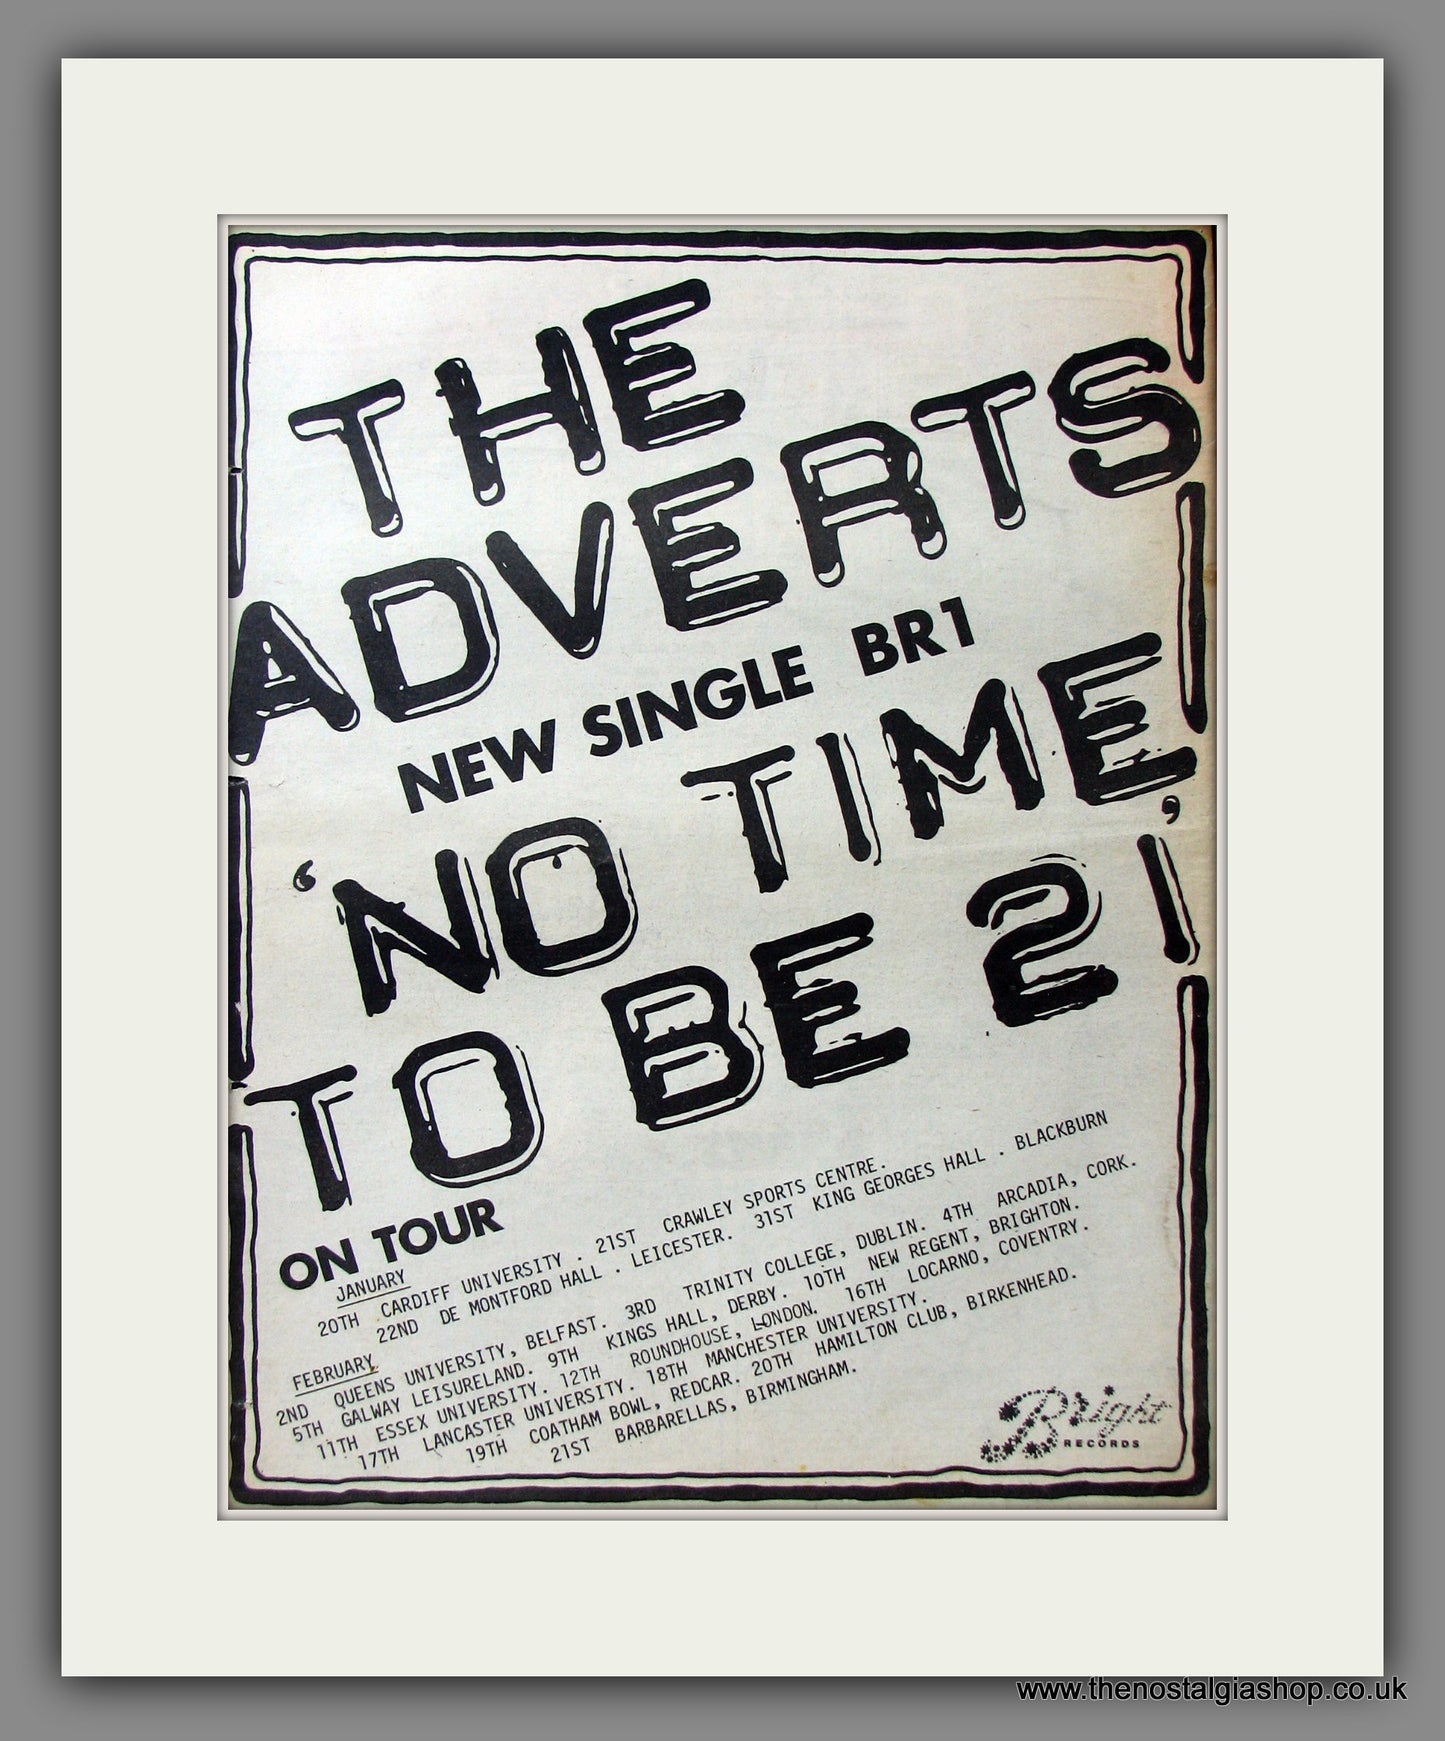 Adverts (The) No Time To Be 21. UK Tour Dates. Original Advert 1978 (ref AD11566)